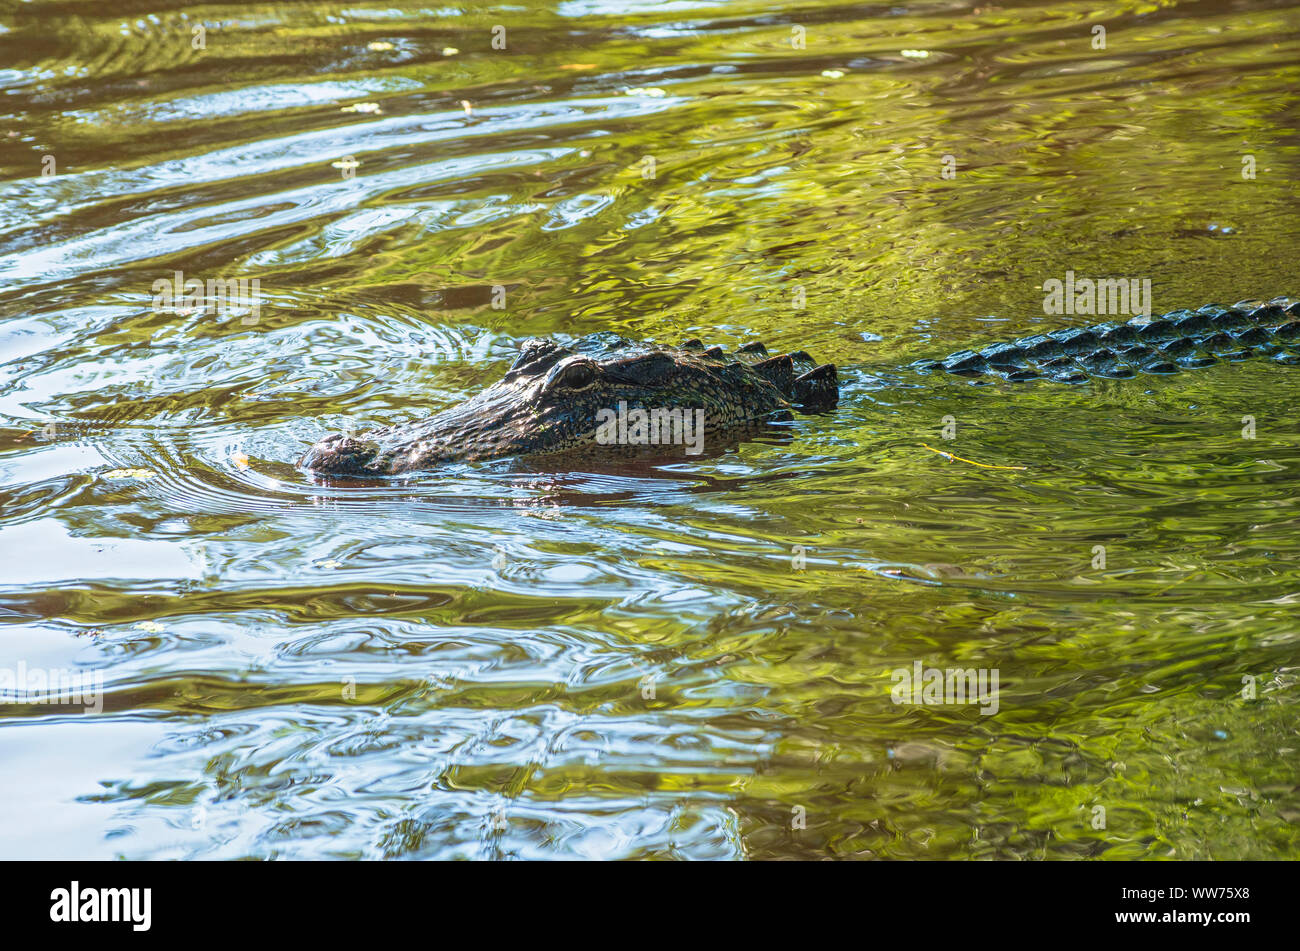 american alligator or alligator mississippiensis submerged in water with snout just above surface Stock Photo